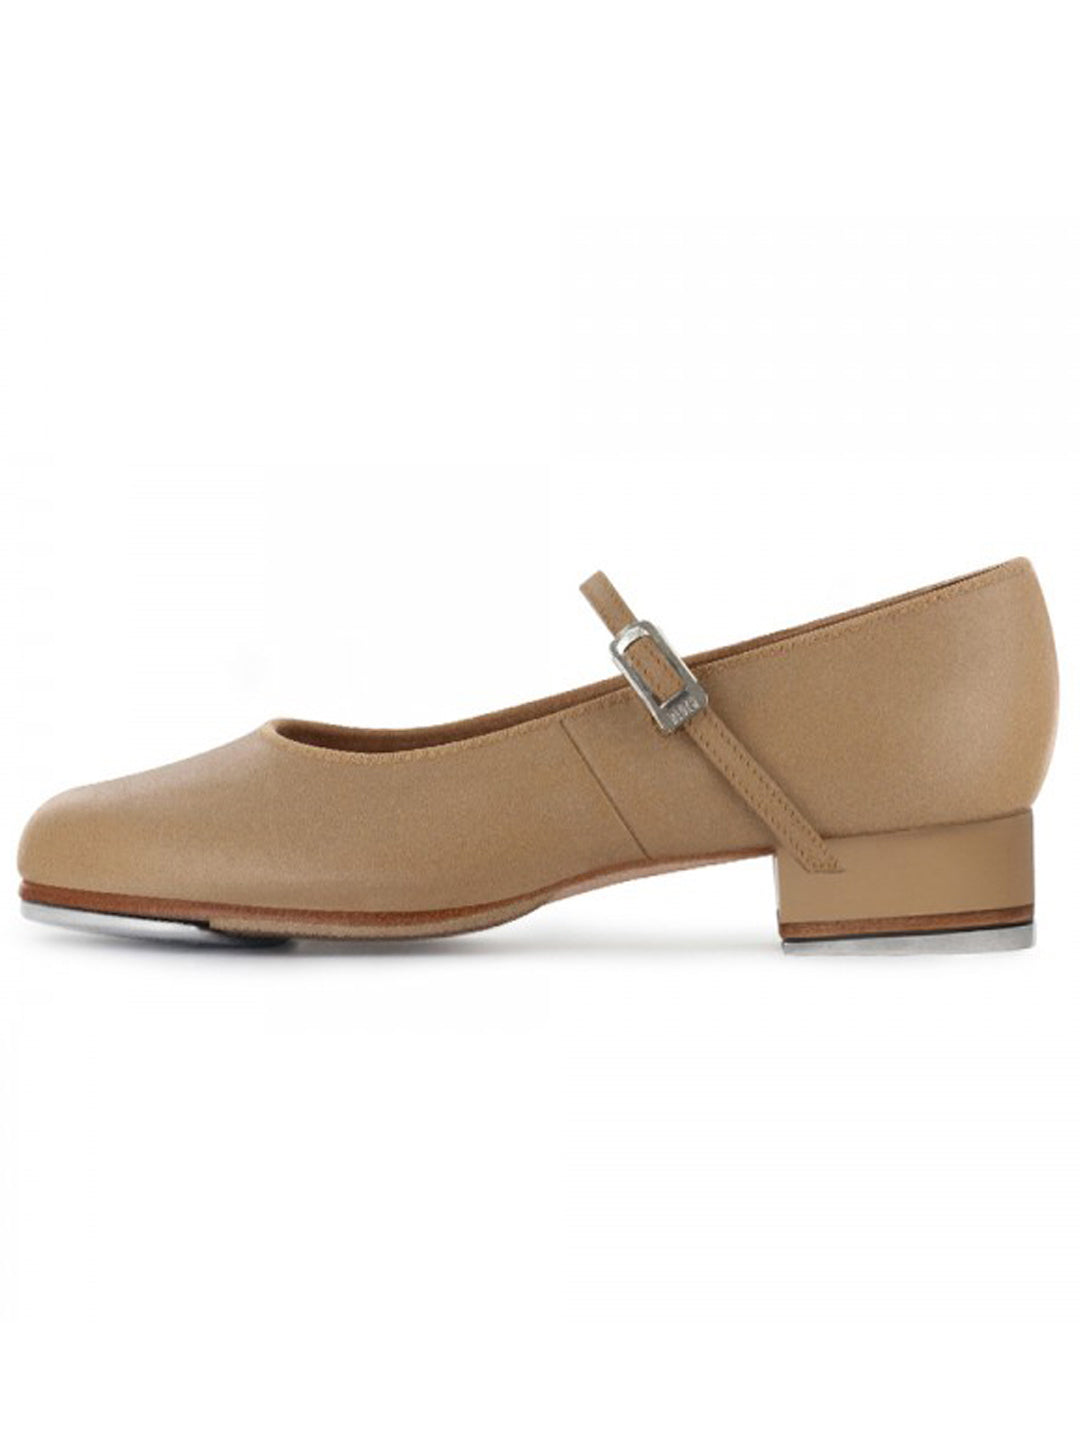 Tap-On Leather Tap Shoe - Tan